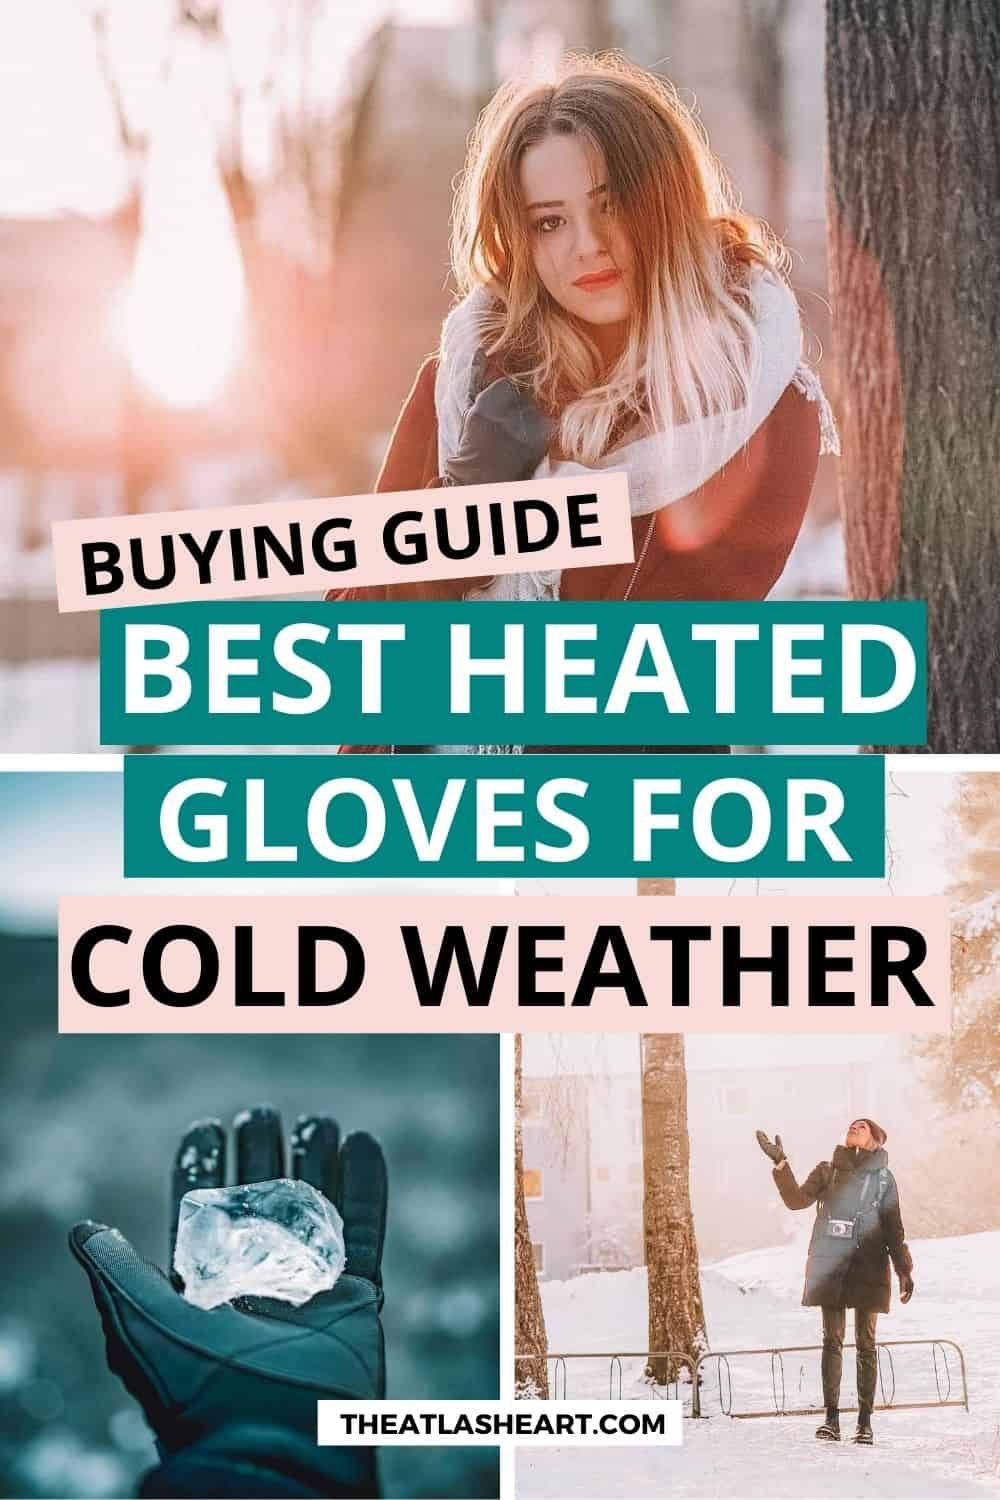 15 Best Heated Gloves for Cold Weather [Stay Warm This Winter]